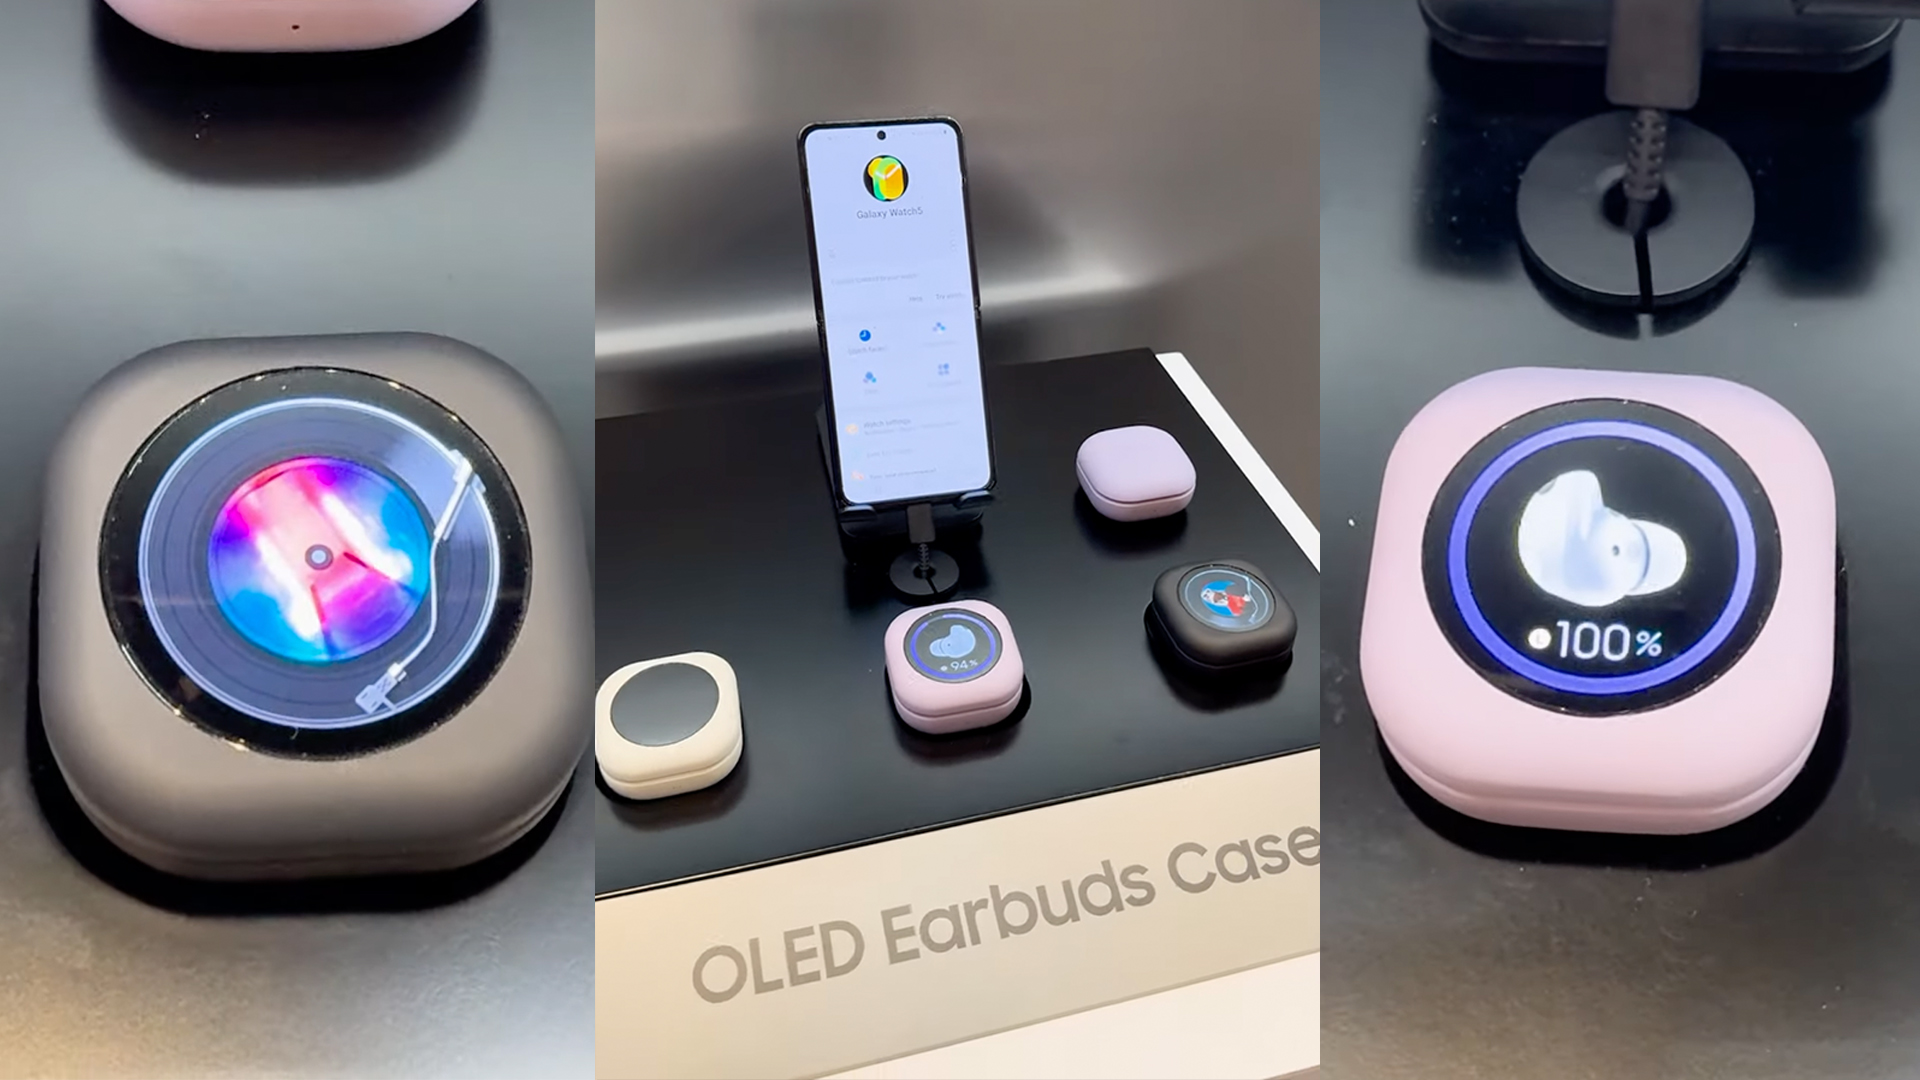 Three images showing the OLED screen of the Samsung Galaxy Buds concept